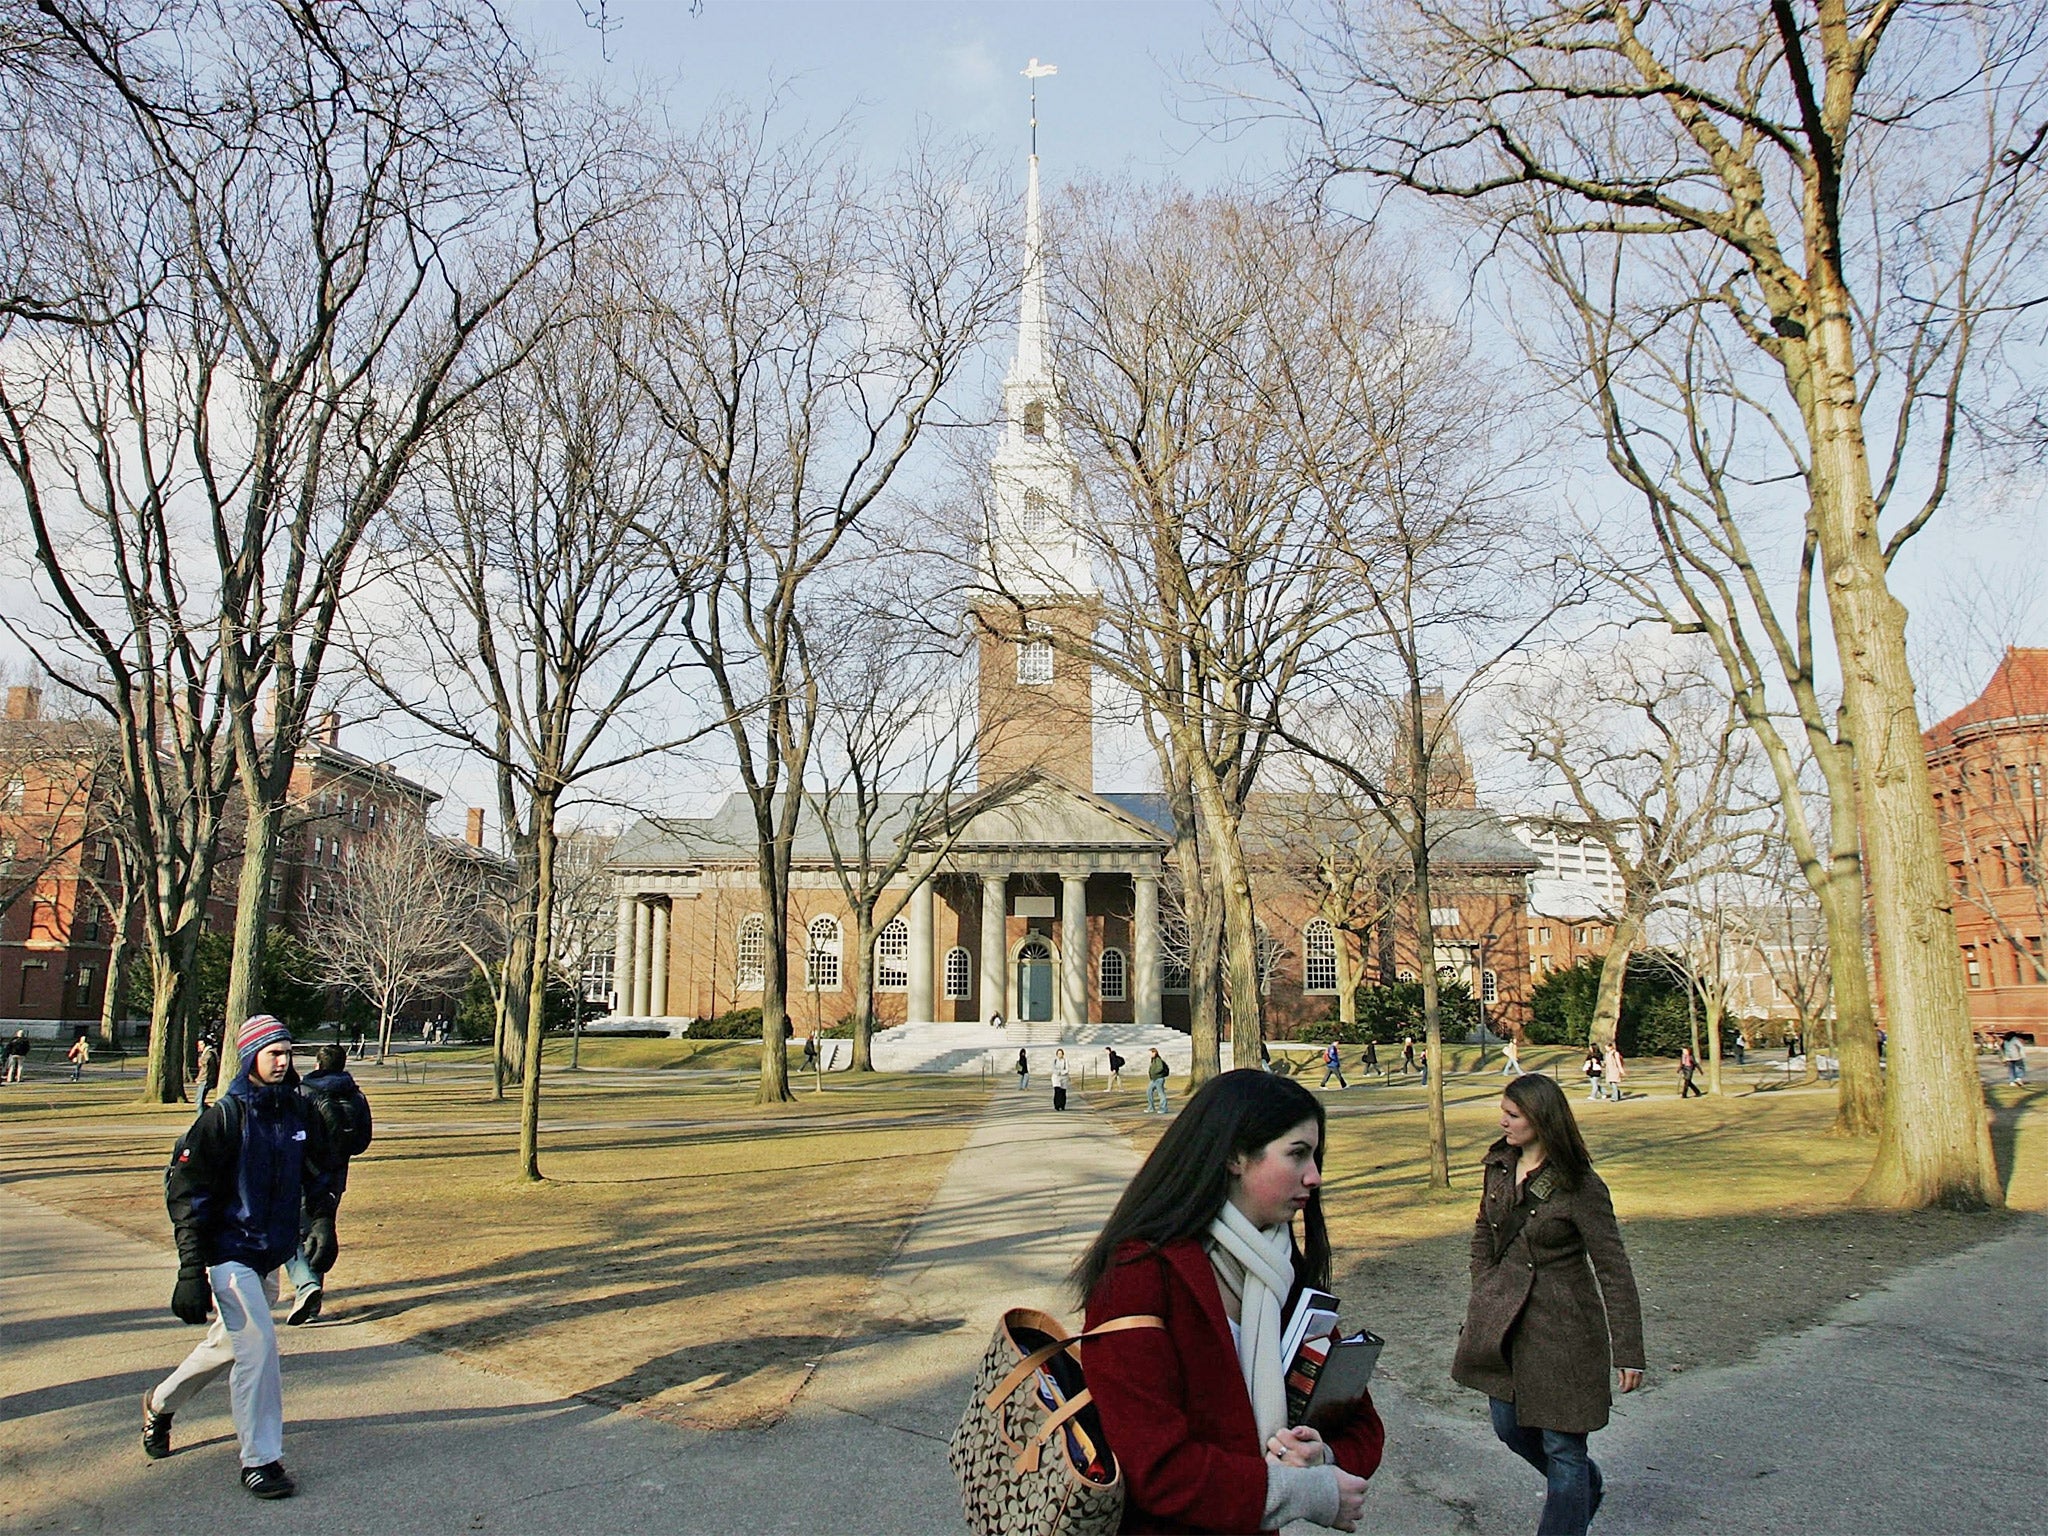 An increasing number of students are opting to study at prestigious US universities, such as Harvard